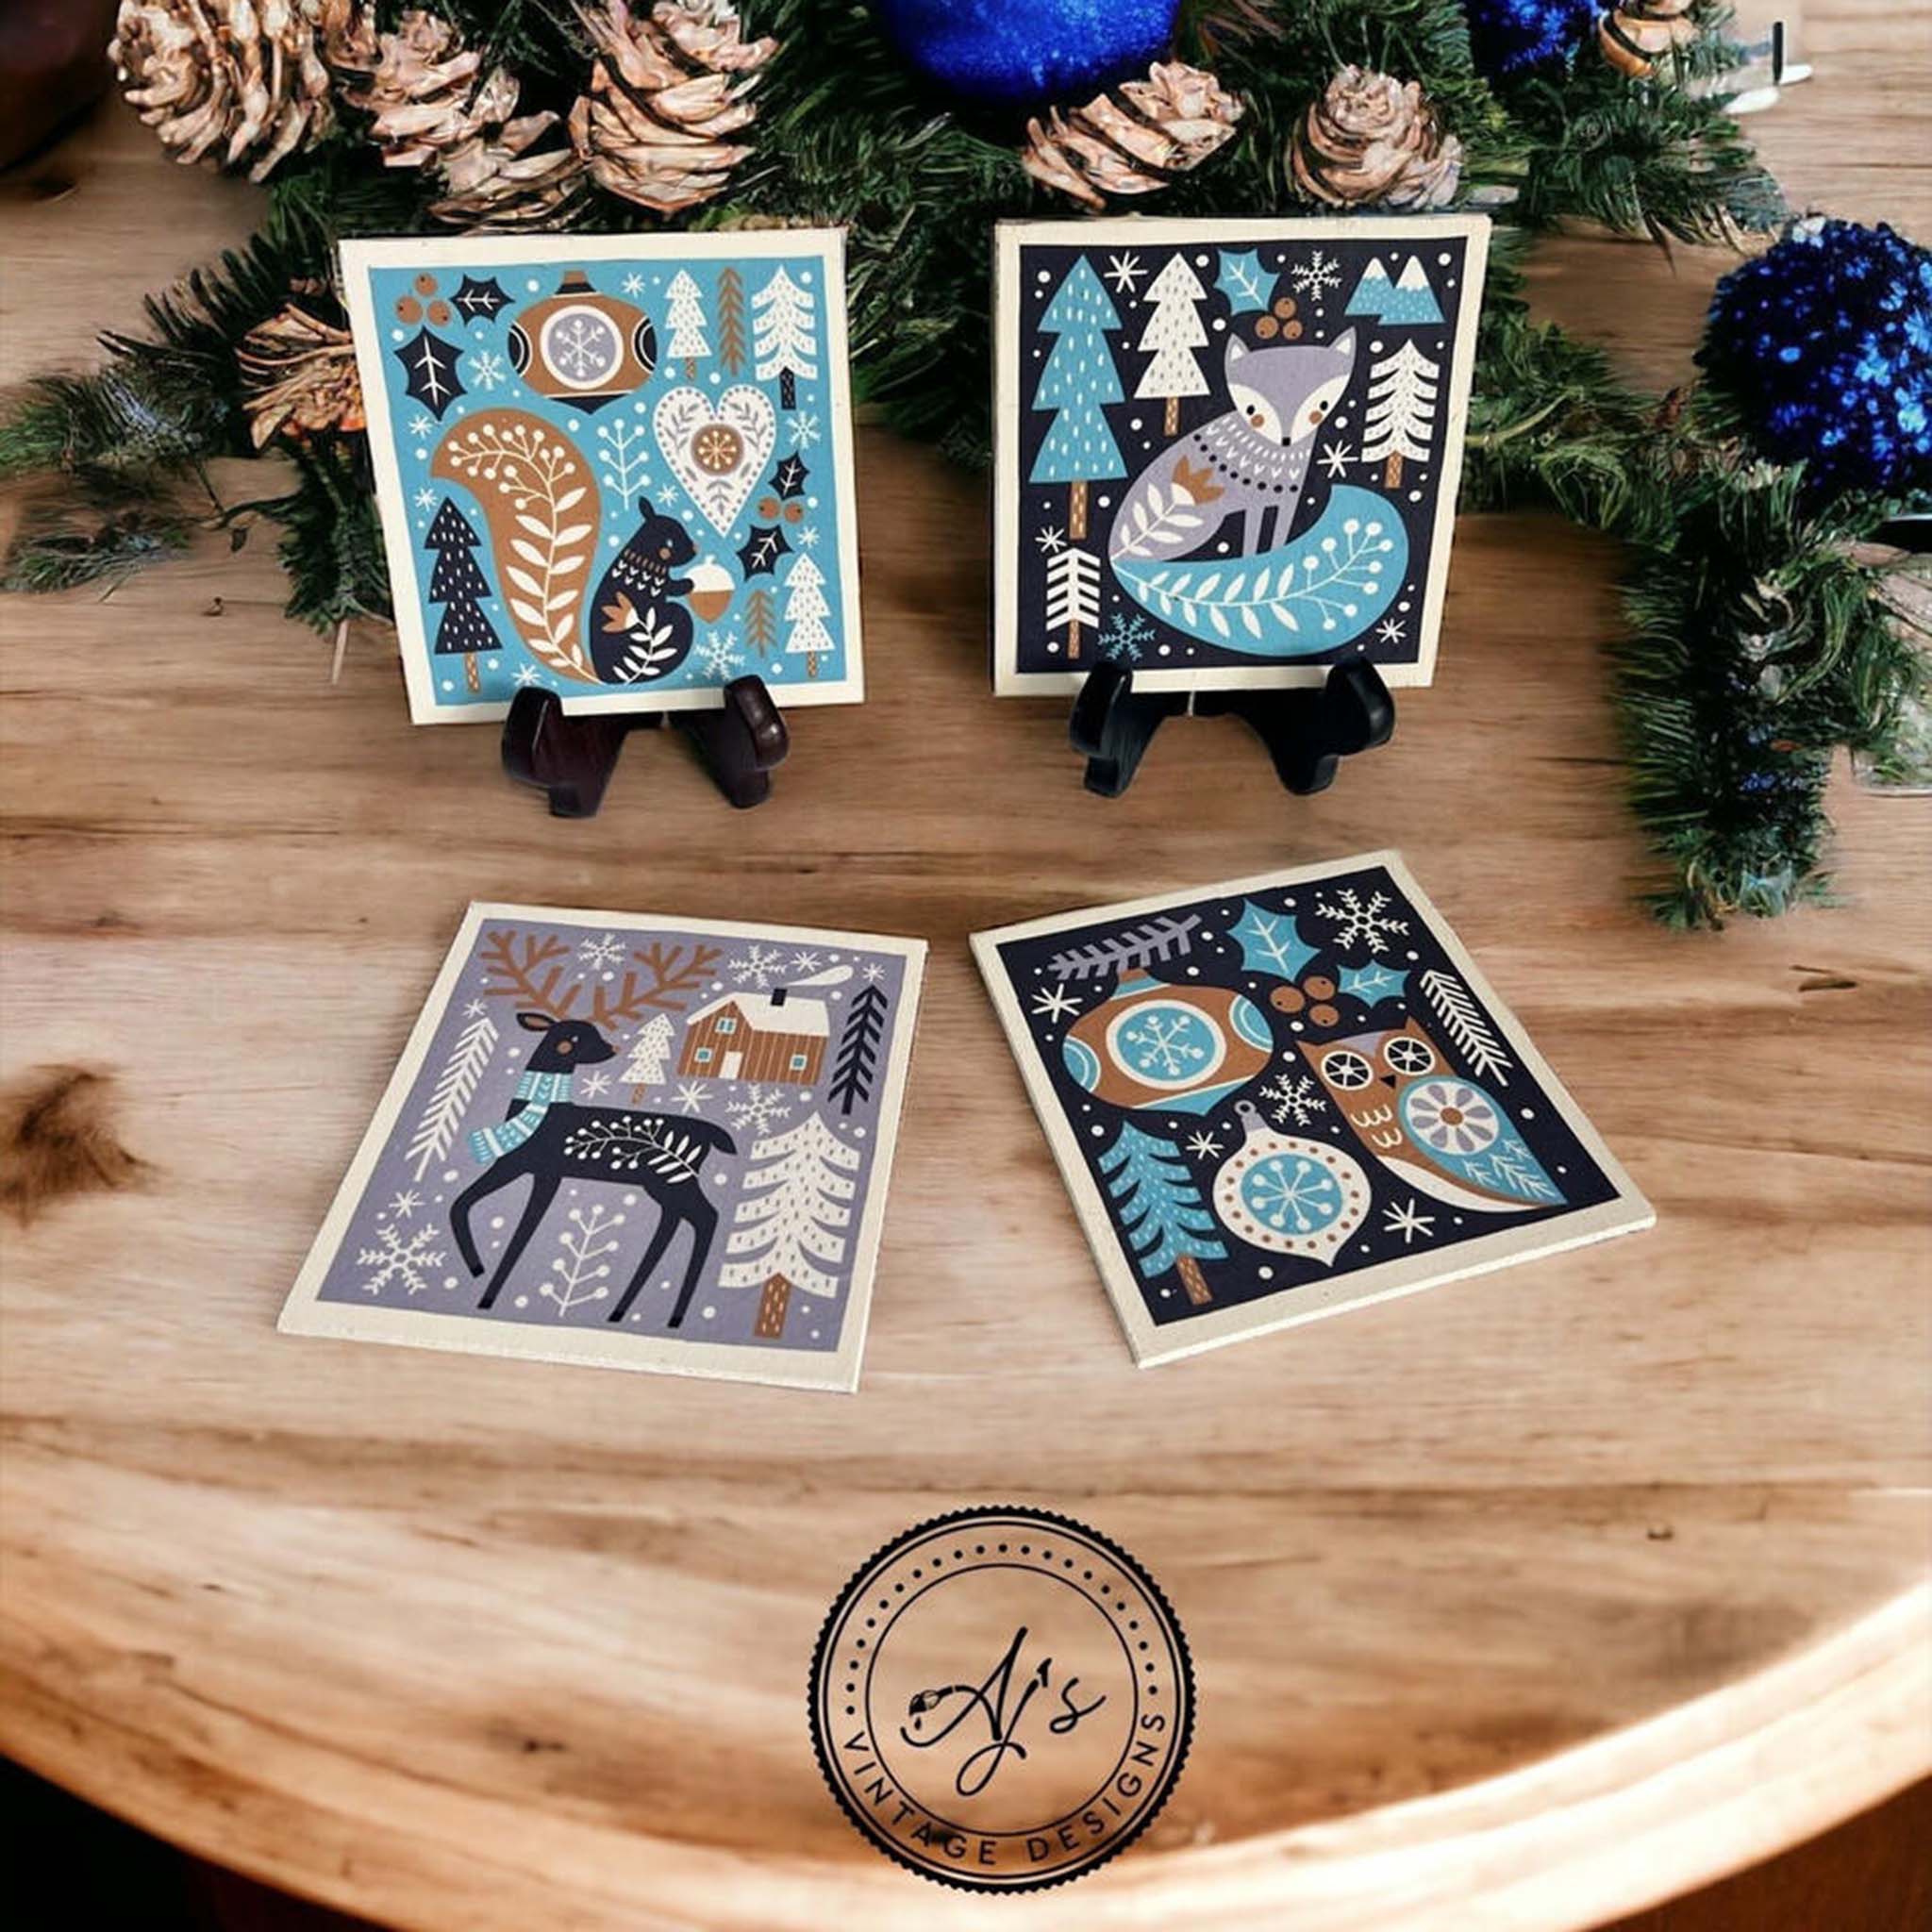 Four small square tiles created by Aj's Vintage Designs are painted white and feature Belles & Whistles' Nordic Noel rice paper on them.